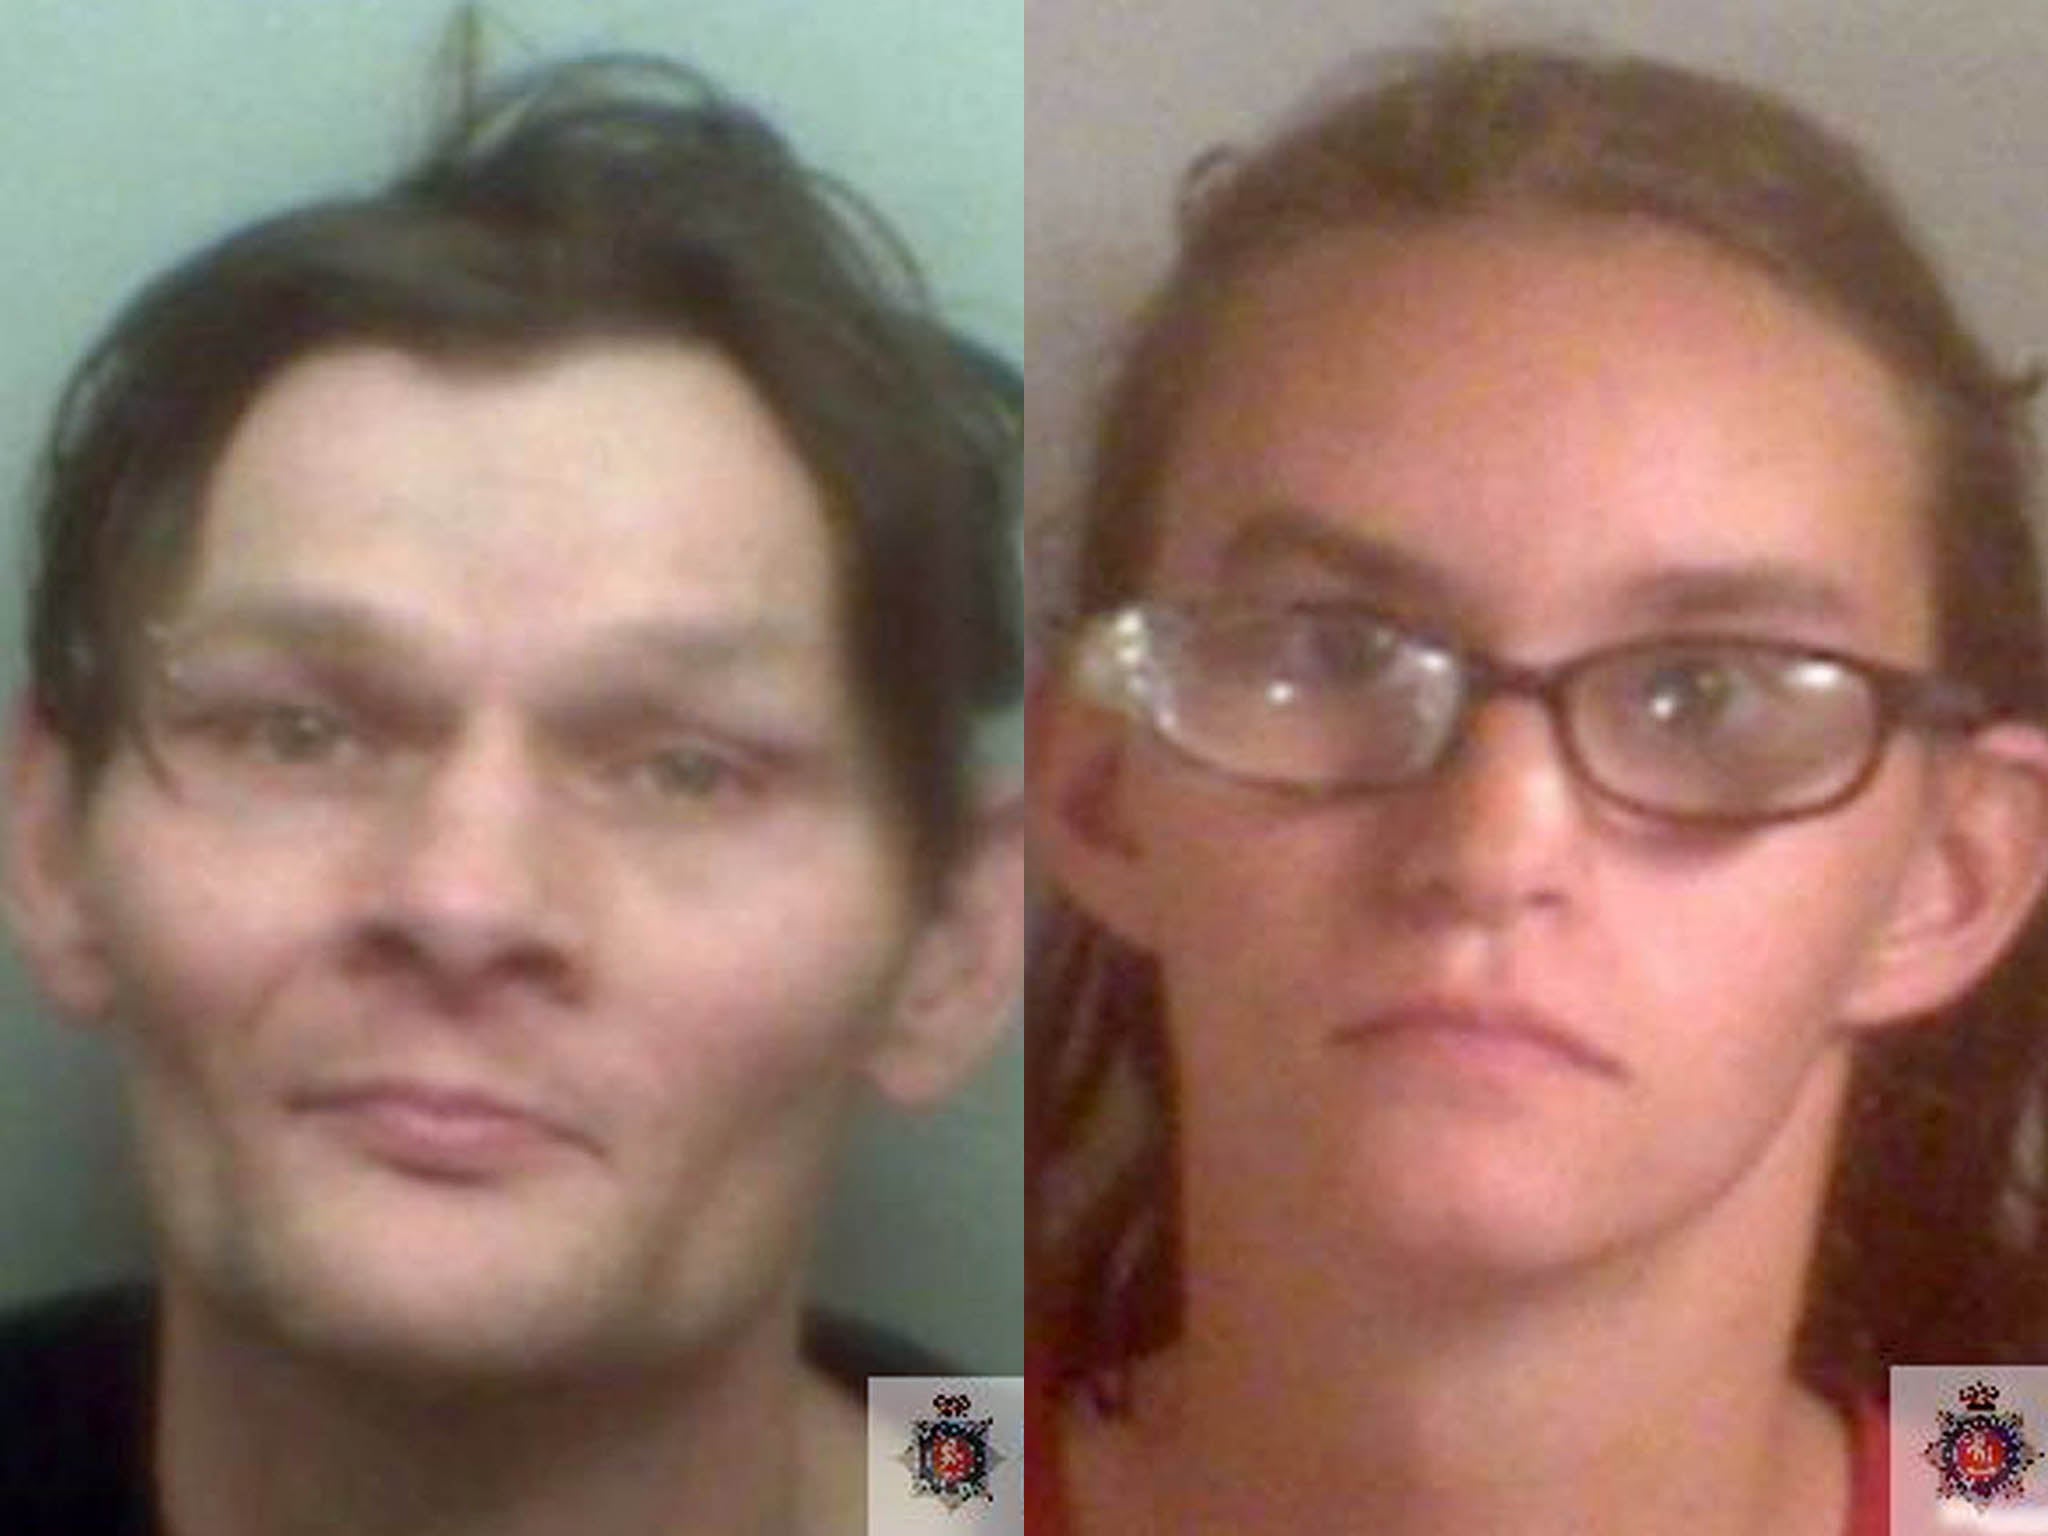 Antony Smith, 47 and Jody Simpson, 24, have each been jailed for 10 years